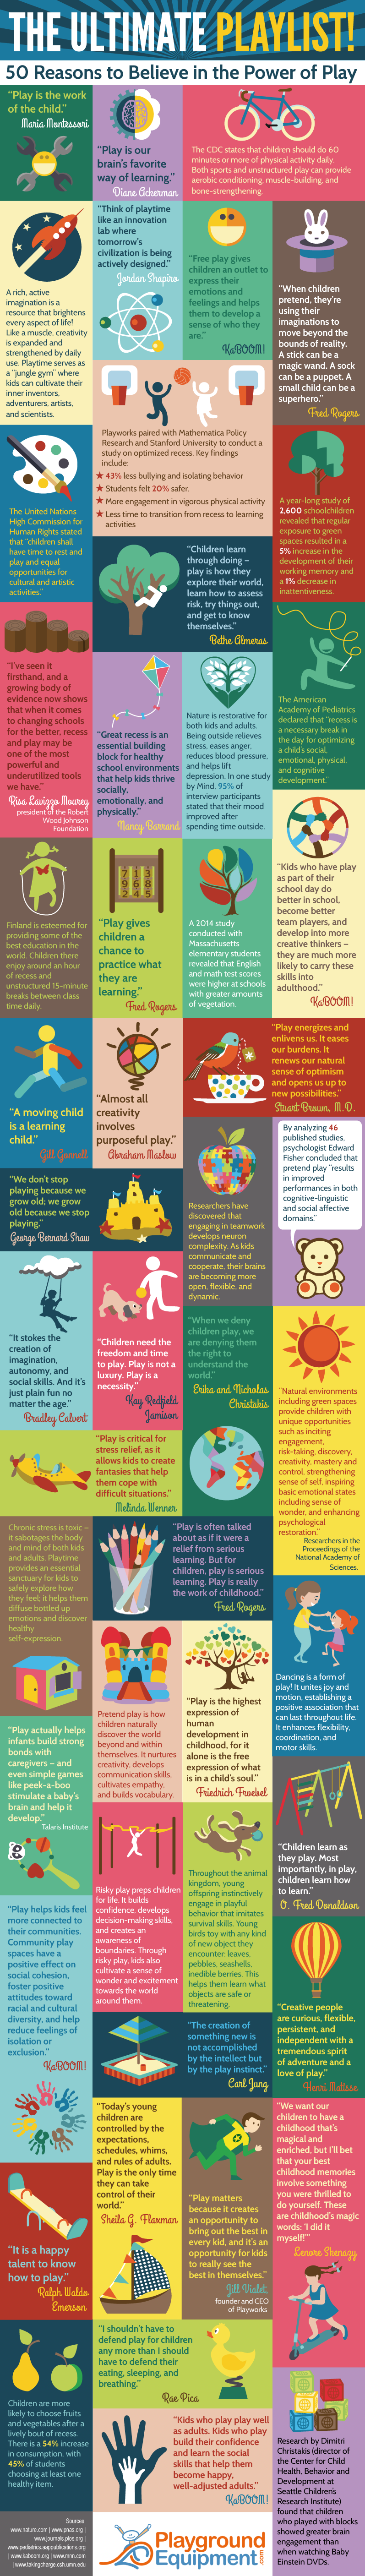 50 Reasons Why Free Play Is Important for Your Students